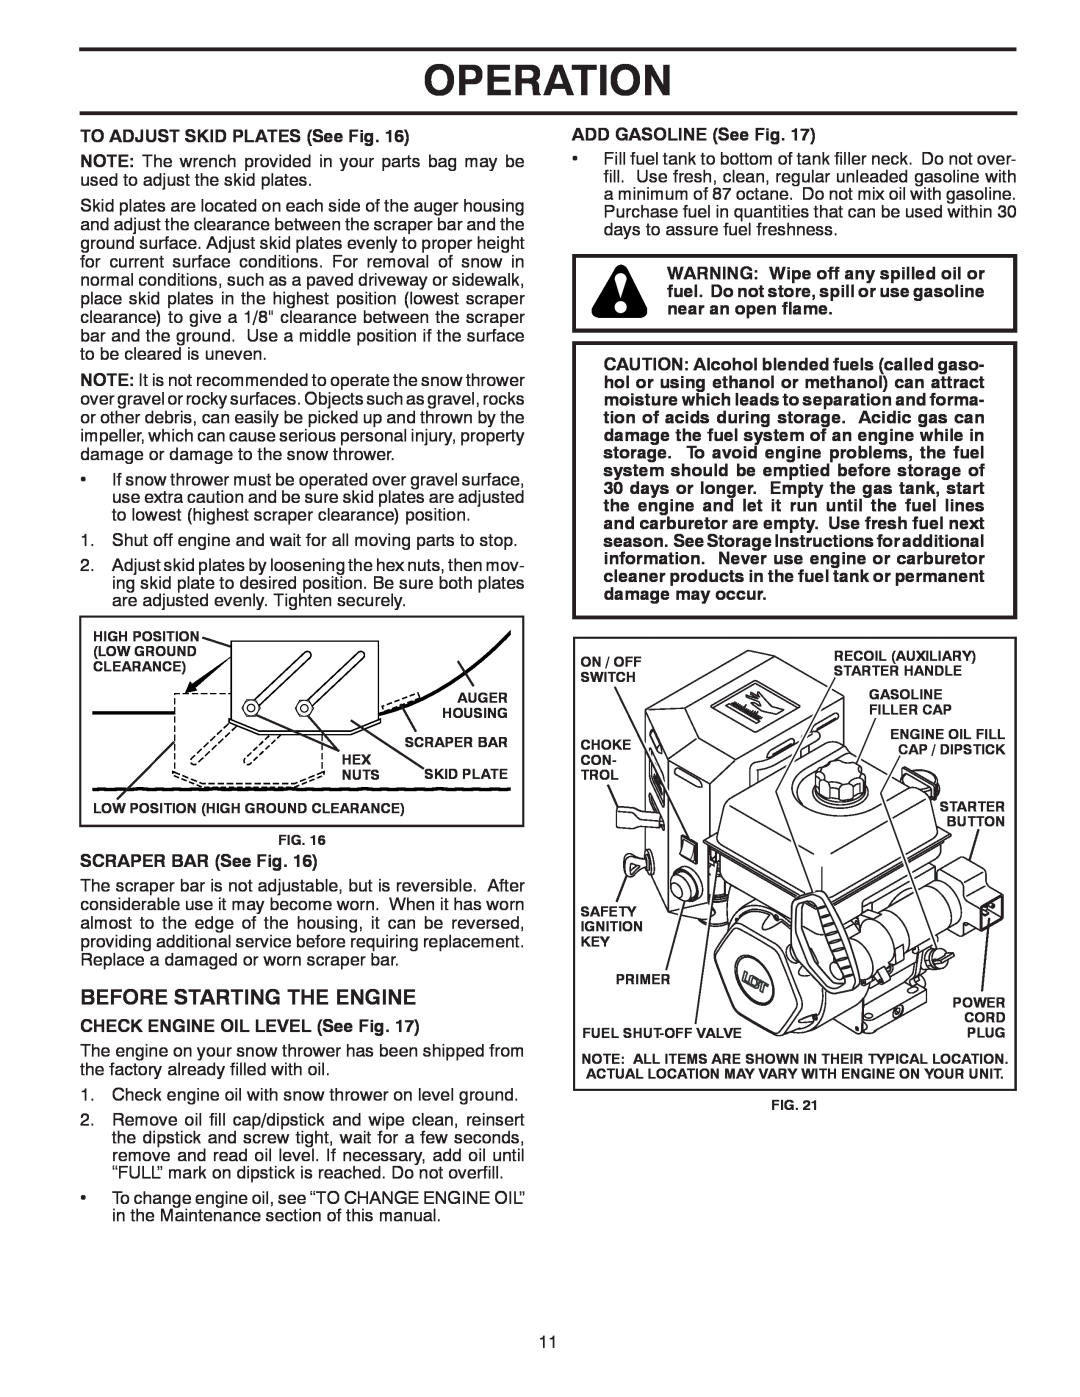 McCulloch 96192004101 Before Starting The Engine, Operation, TO ADJUST SKID PLATES See Fig, SCRAPER BAR See Fig 